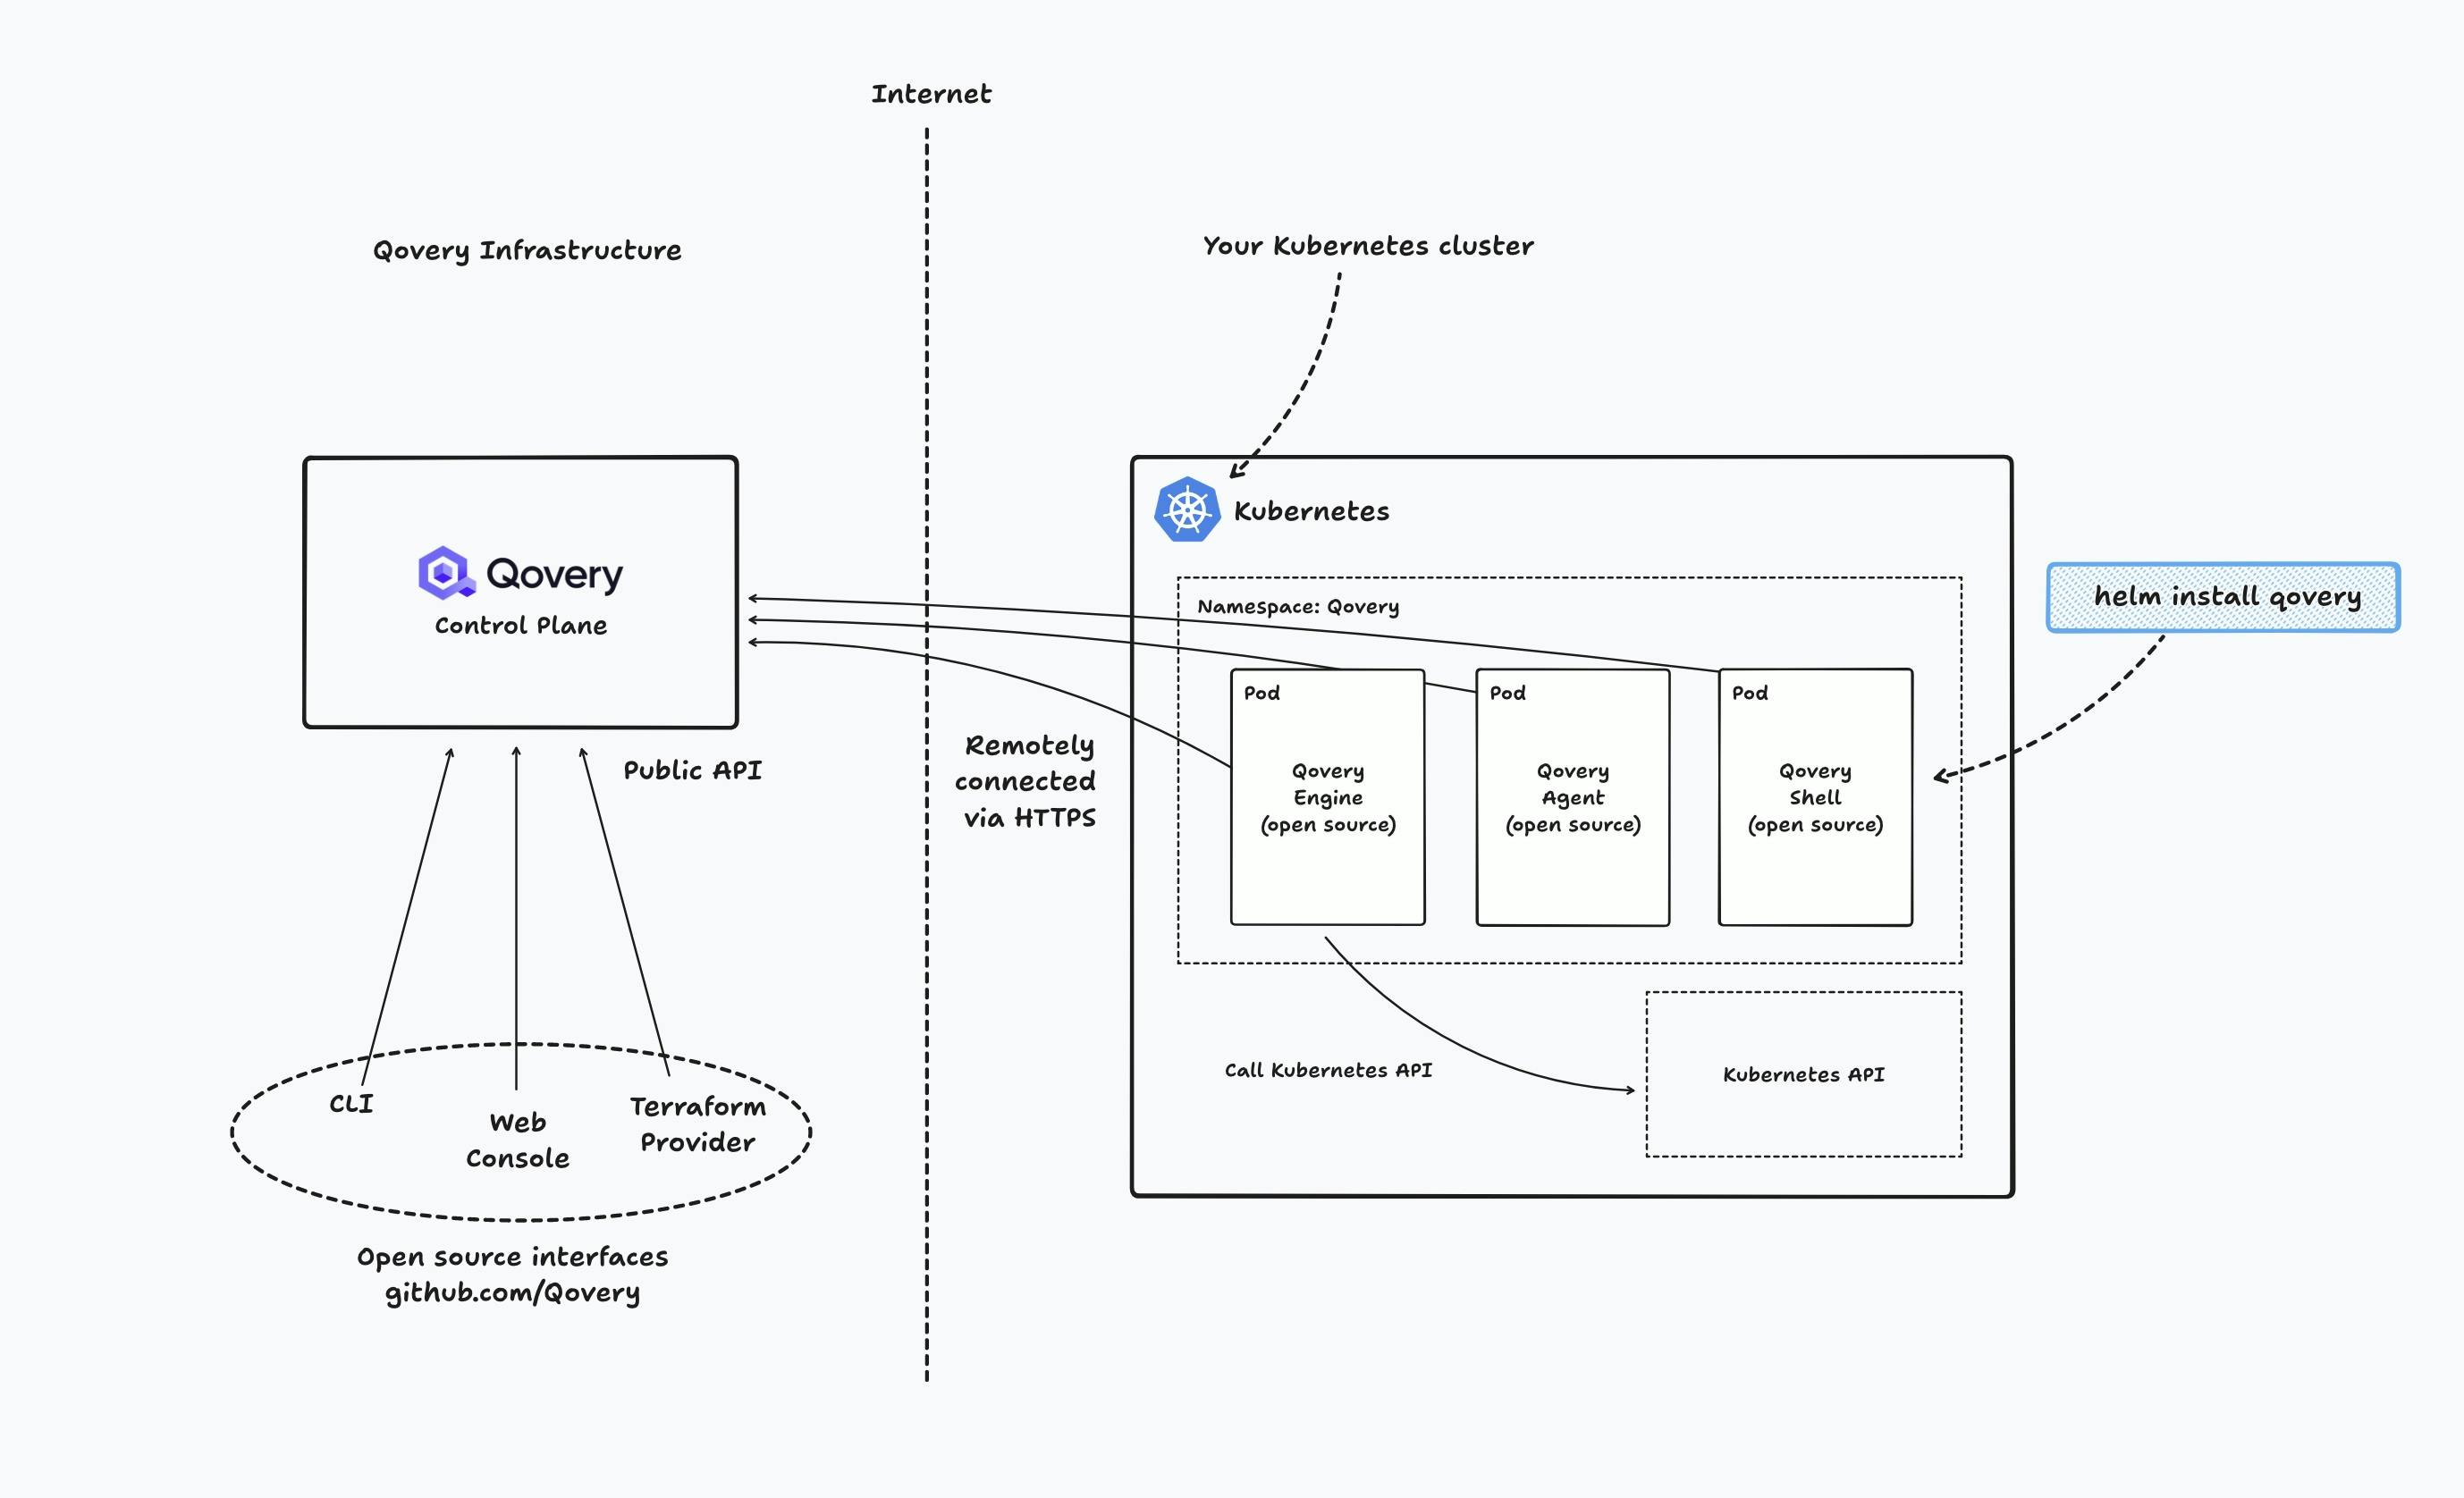 Qovery's control plane runs outside of Kubernetes - but a Qovery agent system runs on Kubernetes